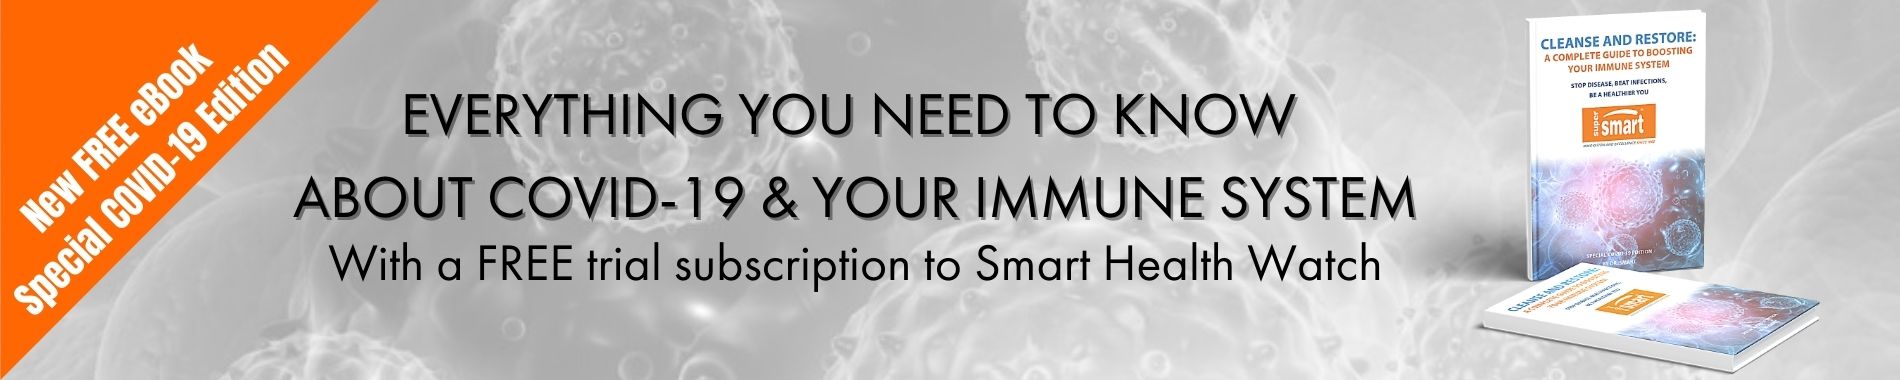 Everything you need to know about Covid-19 and your immune system